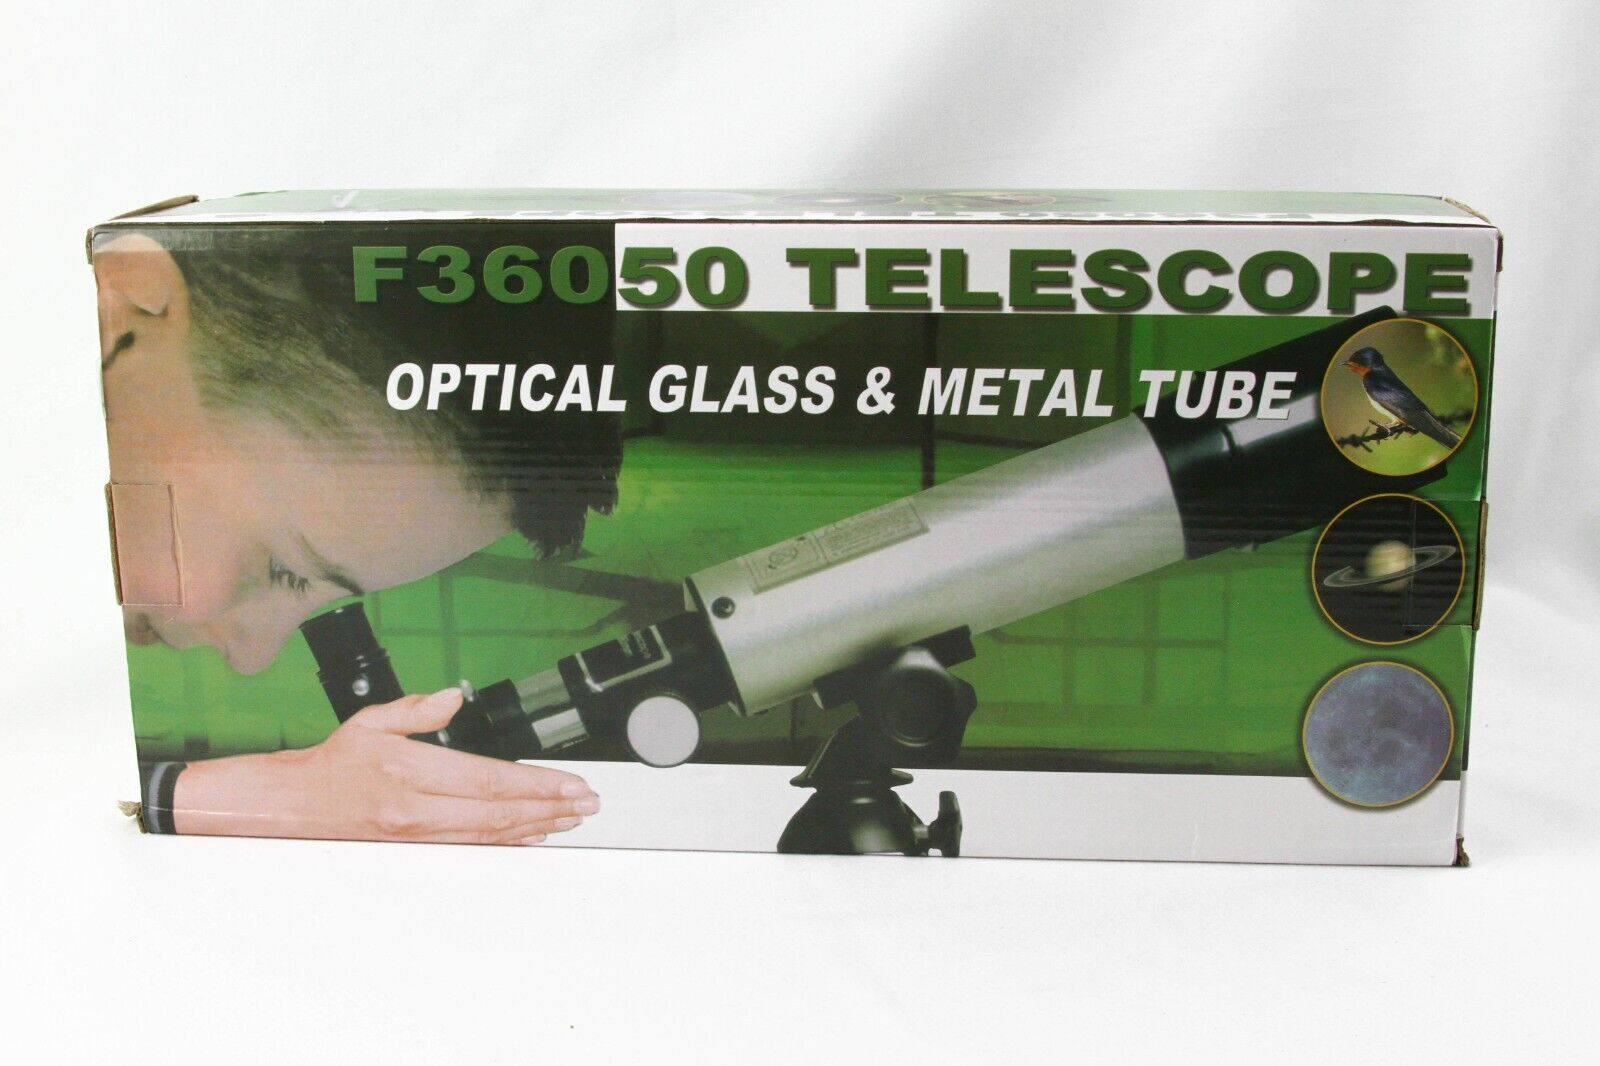 NEW GALAEYES Entry Level Monocular Telescope F36050 With 18X & 60X Lenses